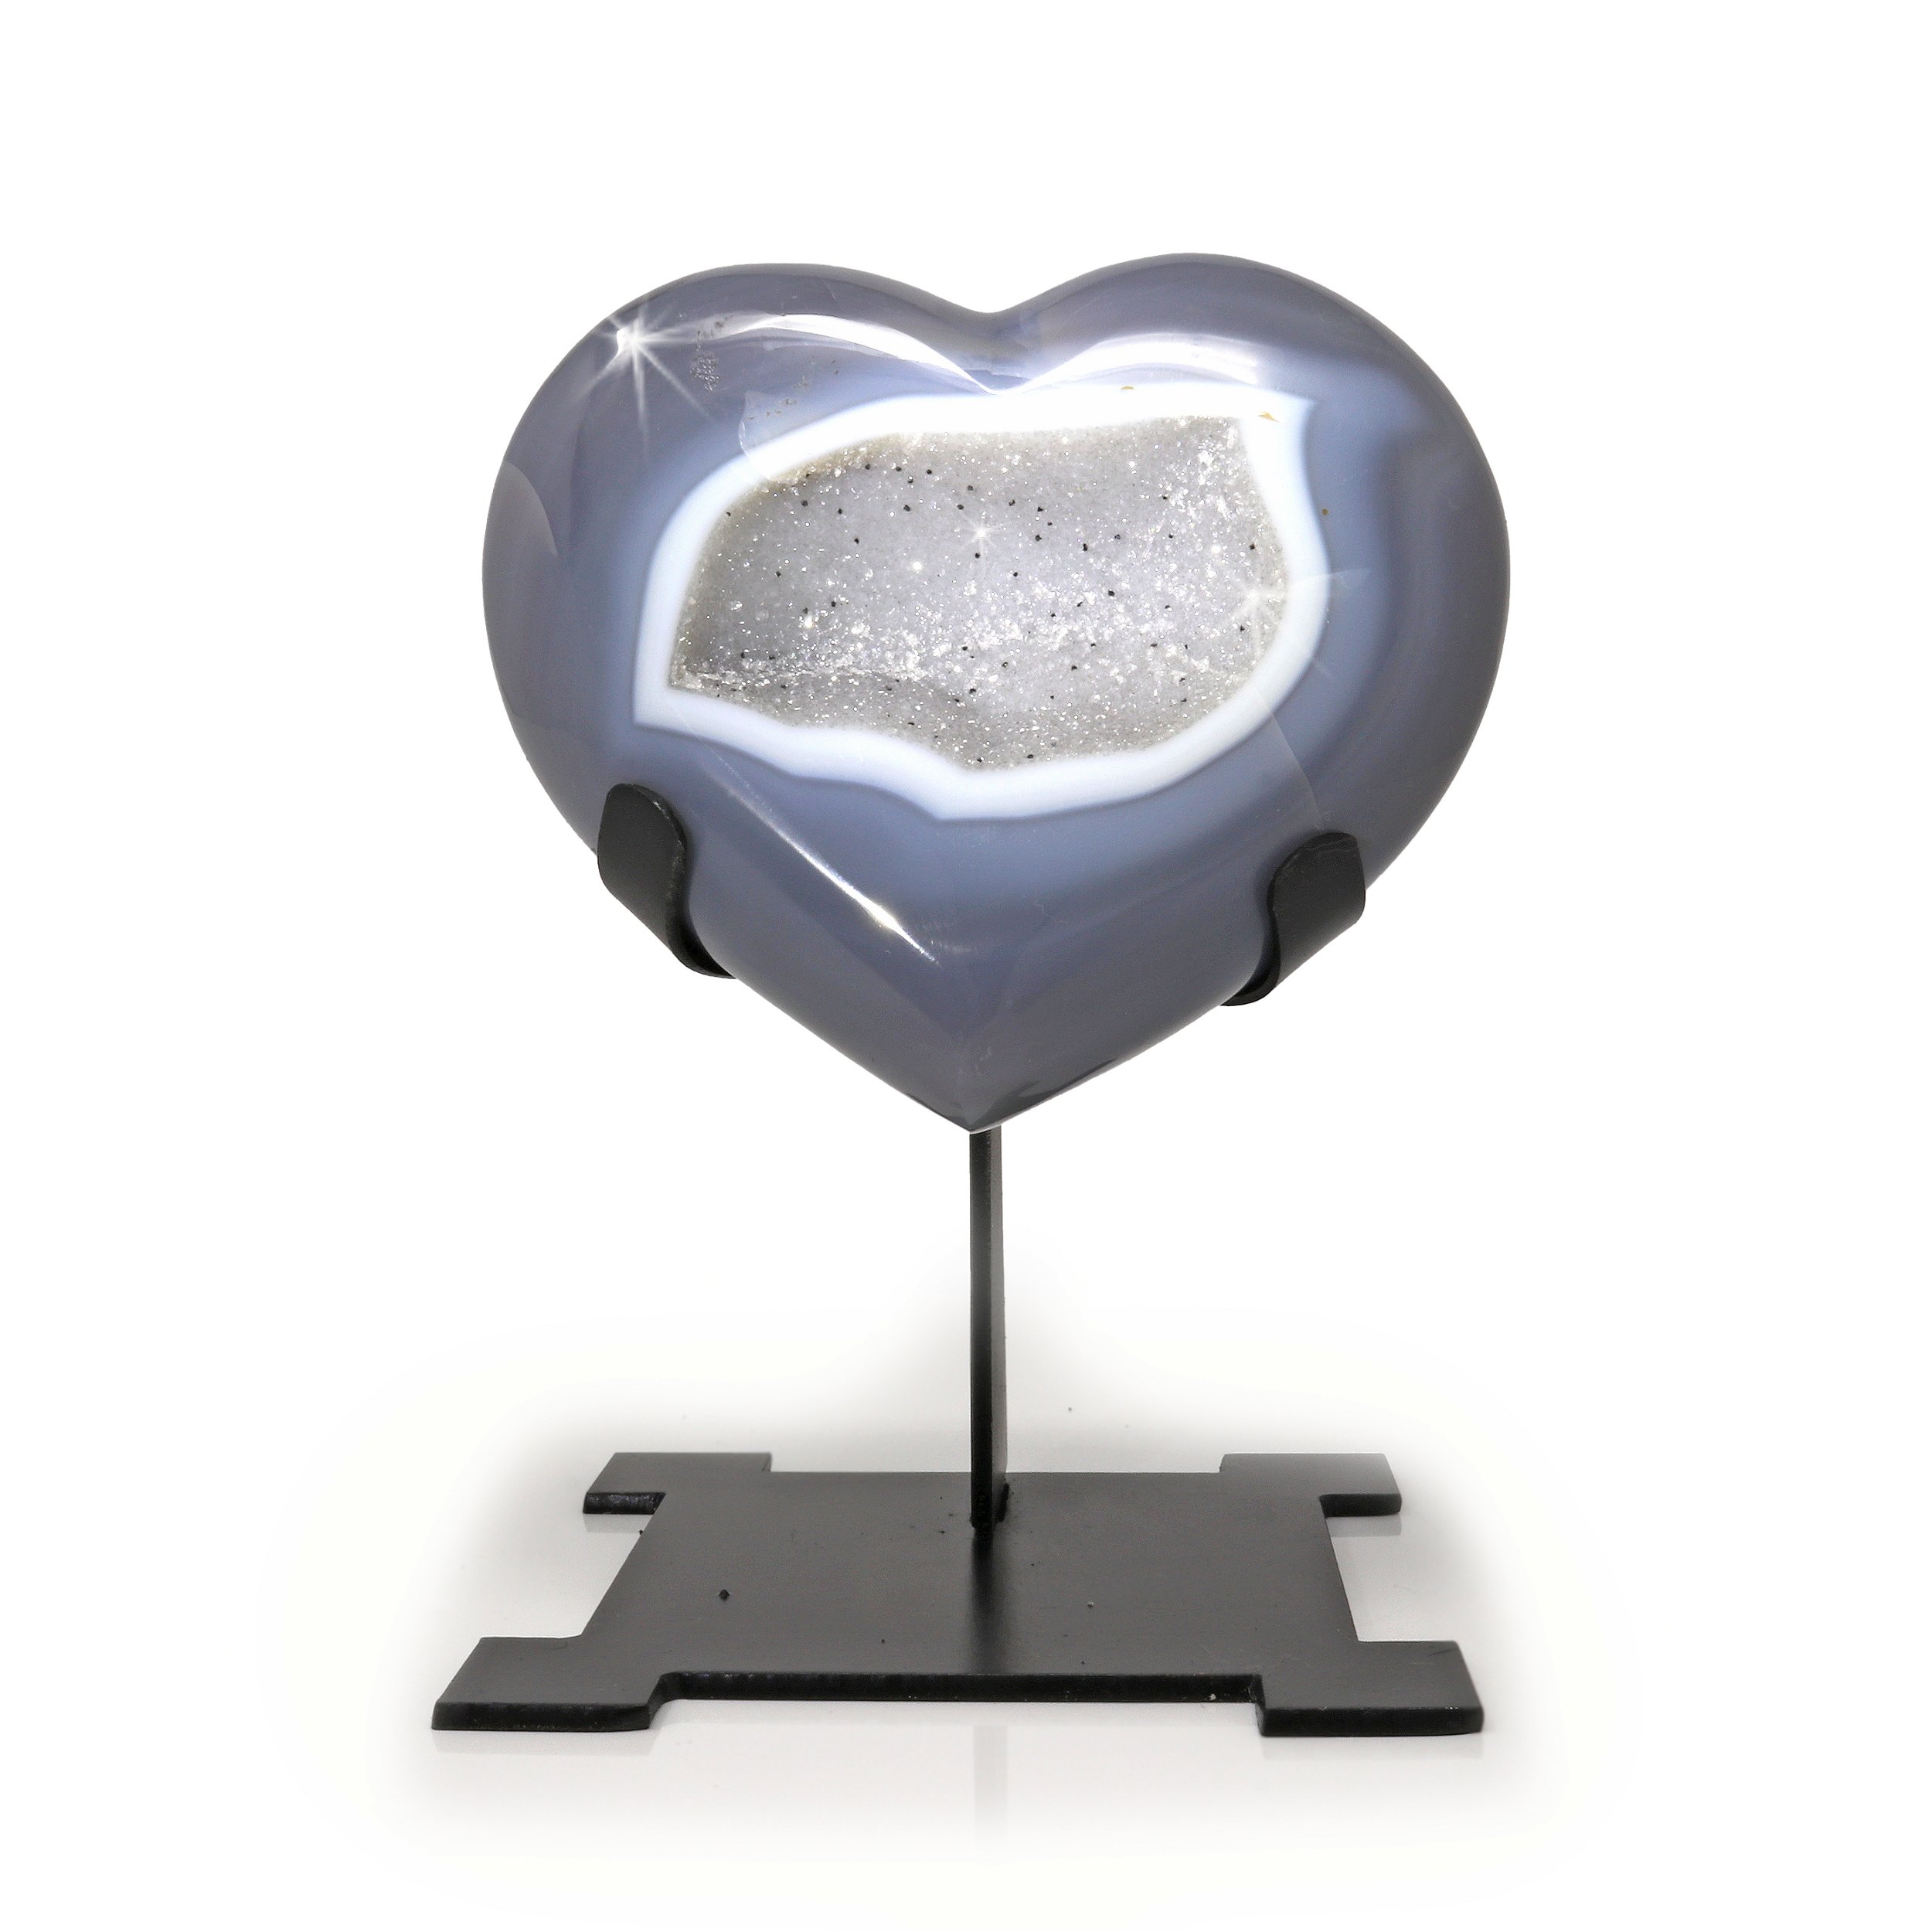 Druze Heart On Custom Aztec Post Stand With Silver Druze Crevice